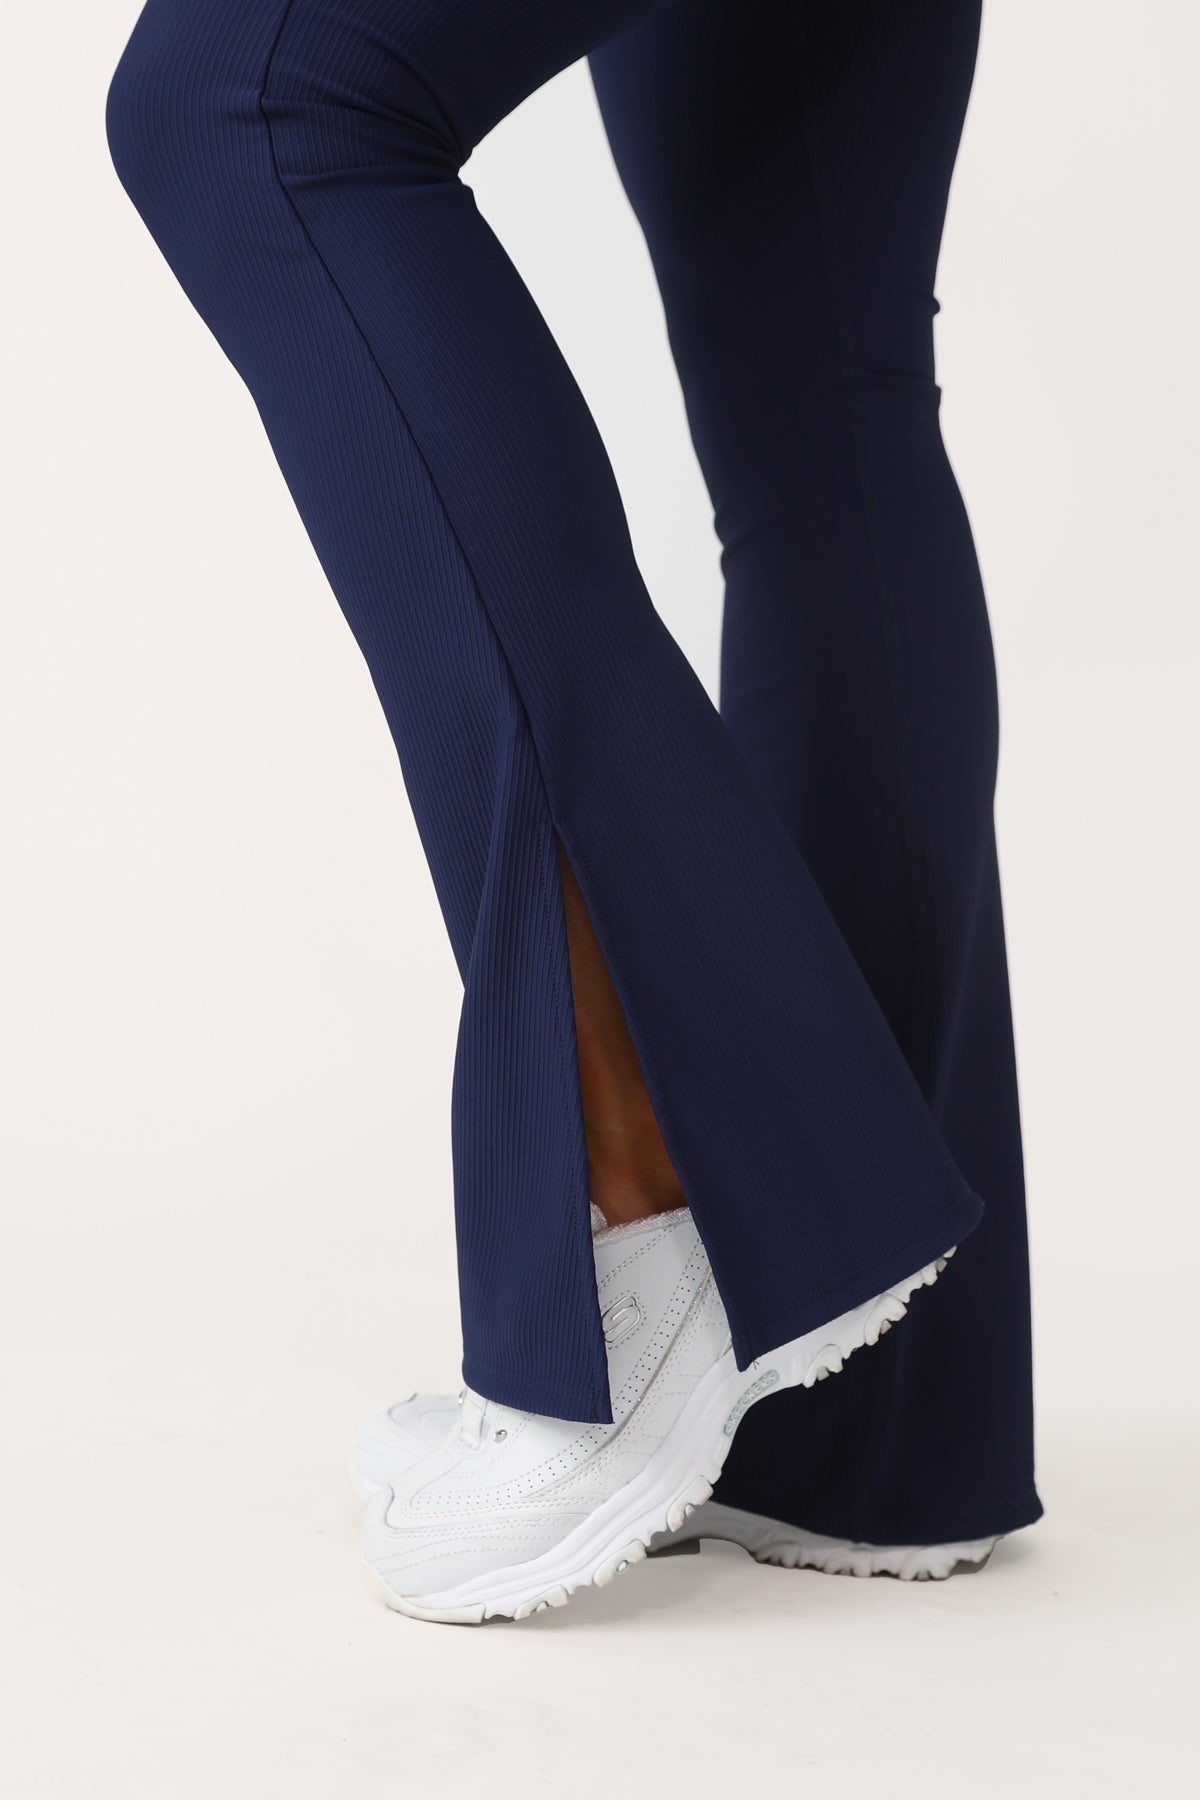 KEEP IT COOL BLUE ACTIVE FLARE PANT – Kittenish